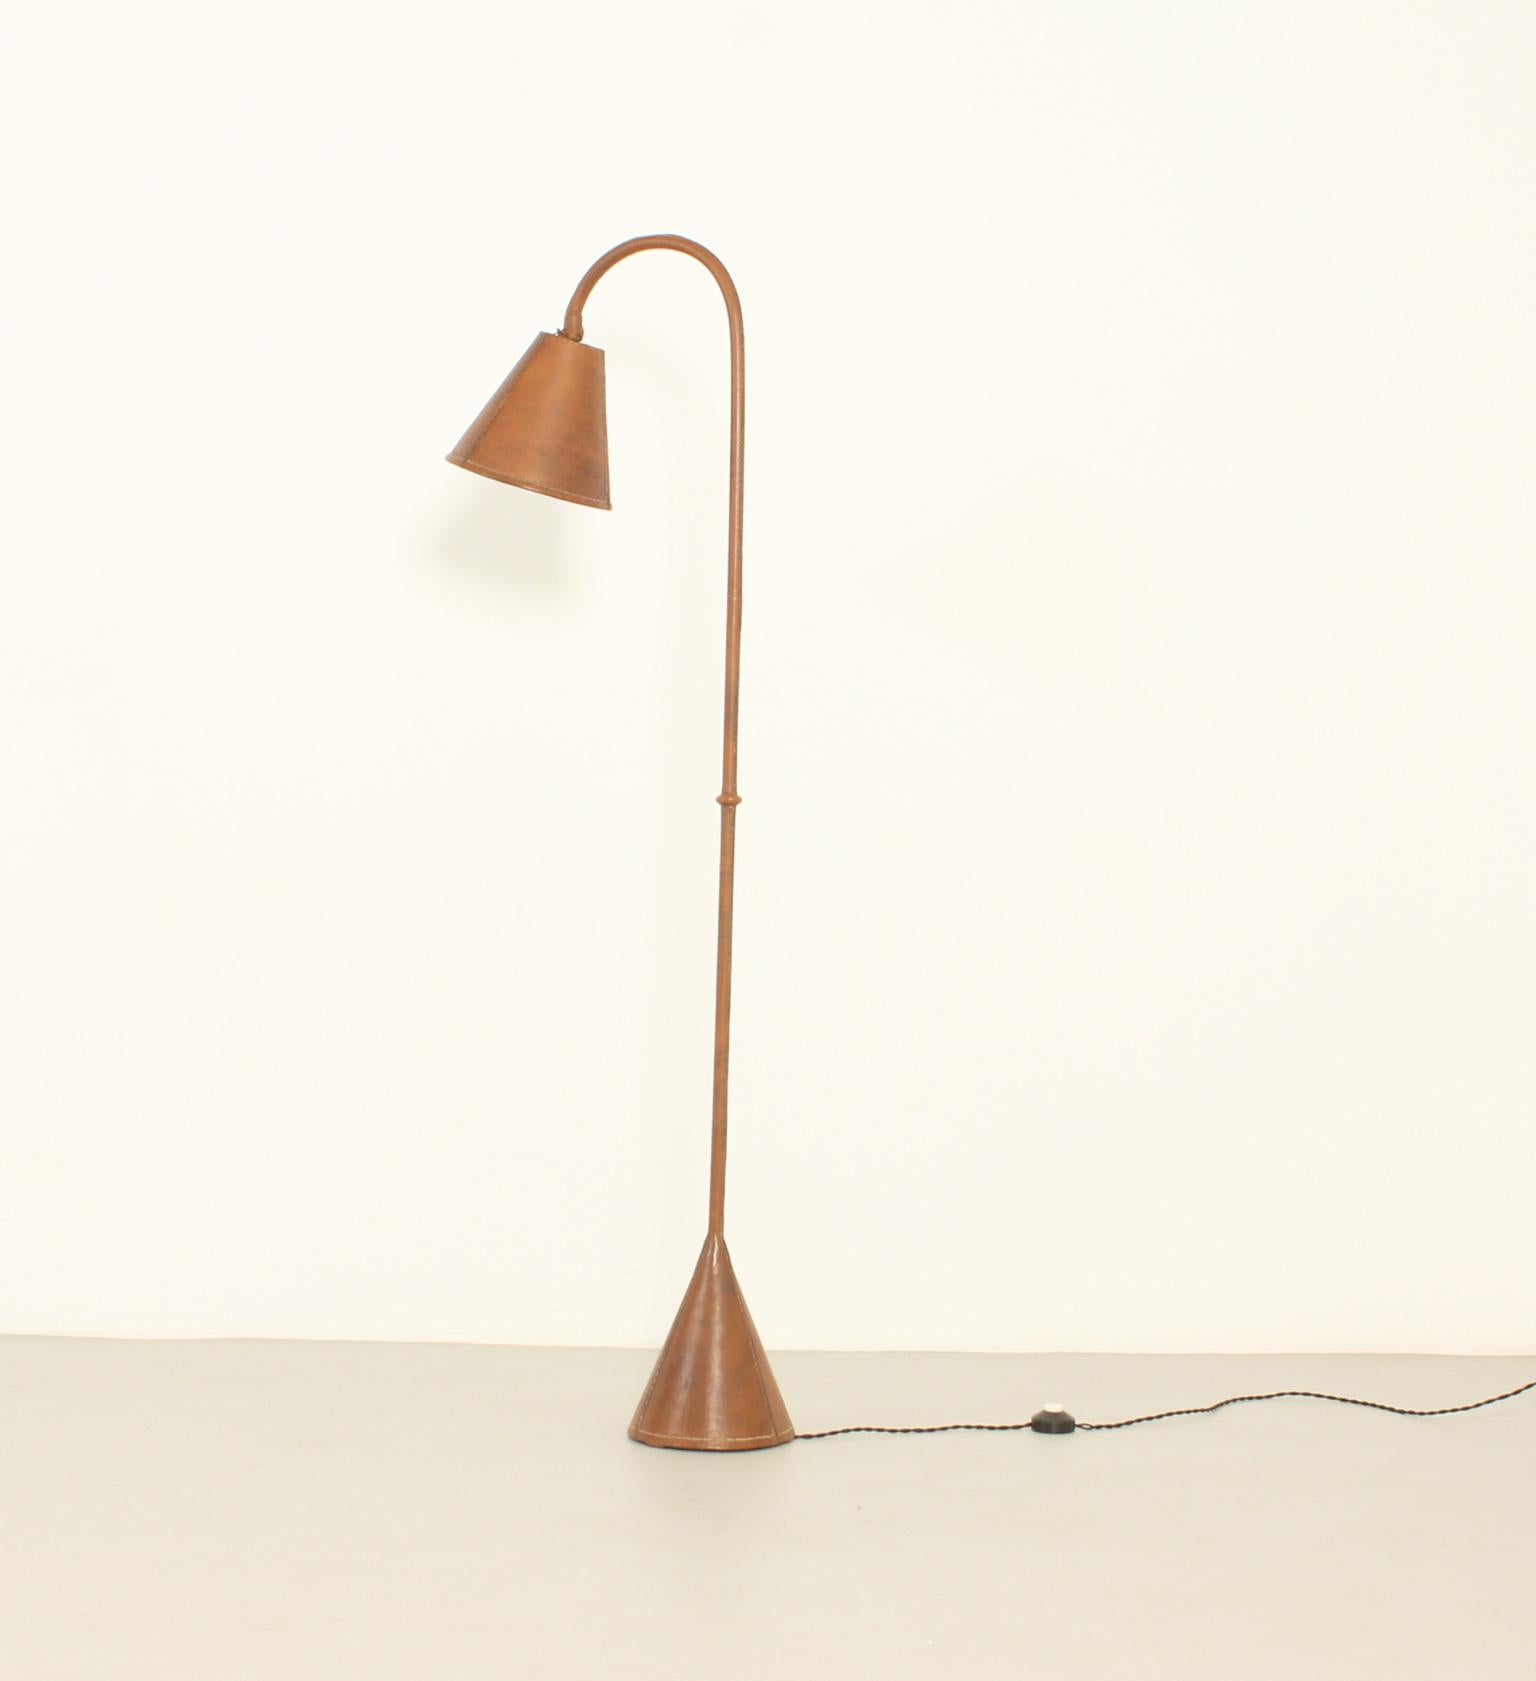 Metal Floor Lamp by Valenti in Brown Leather, Spain, 1950's For Sale